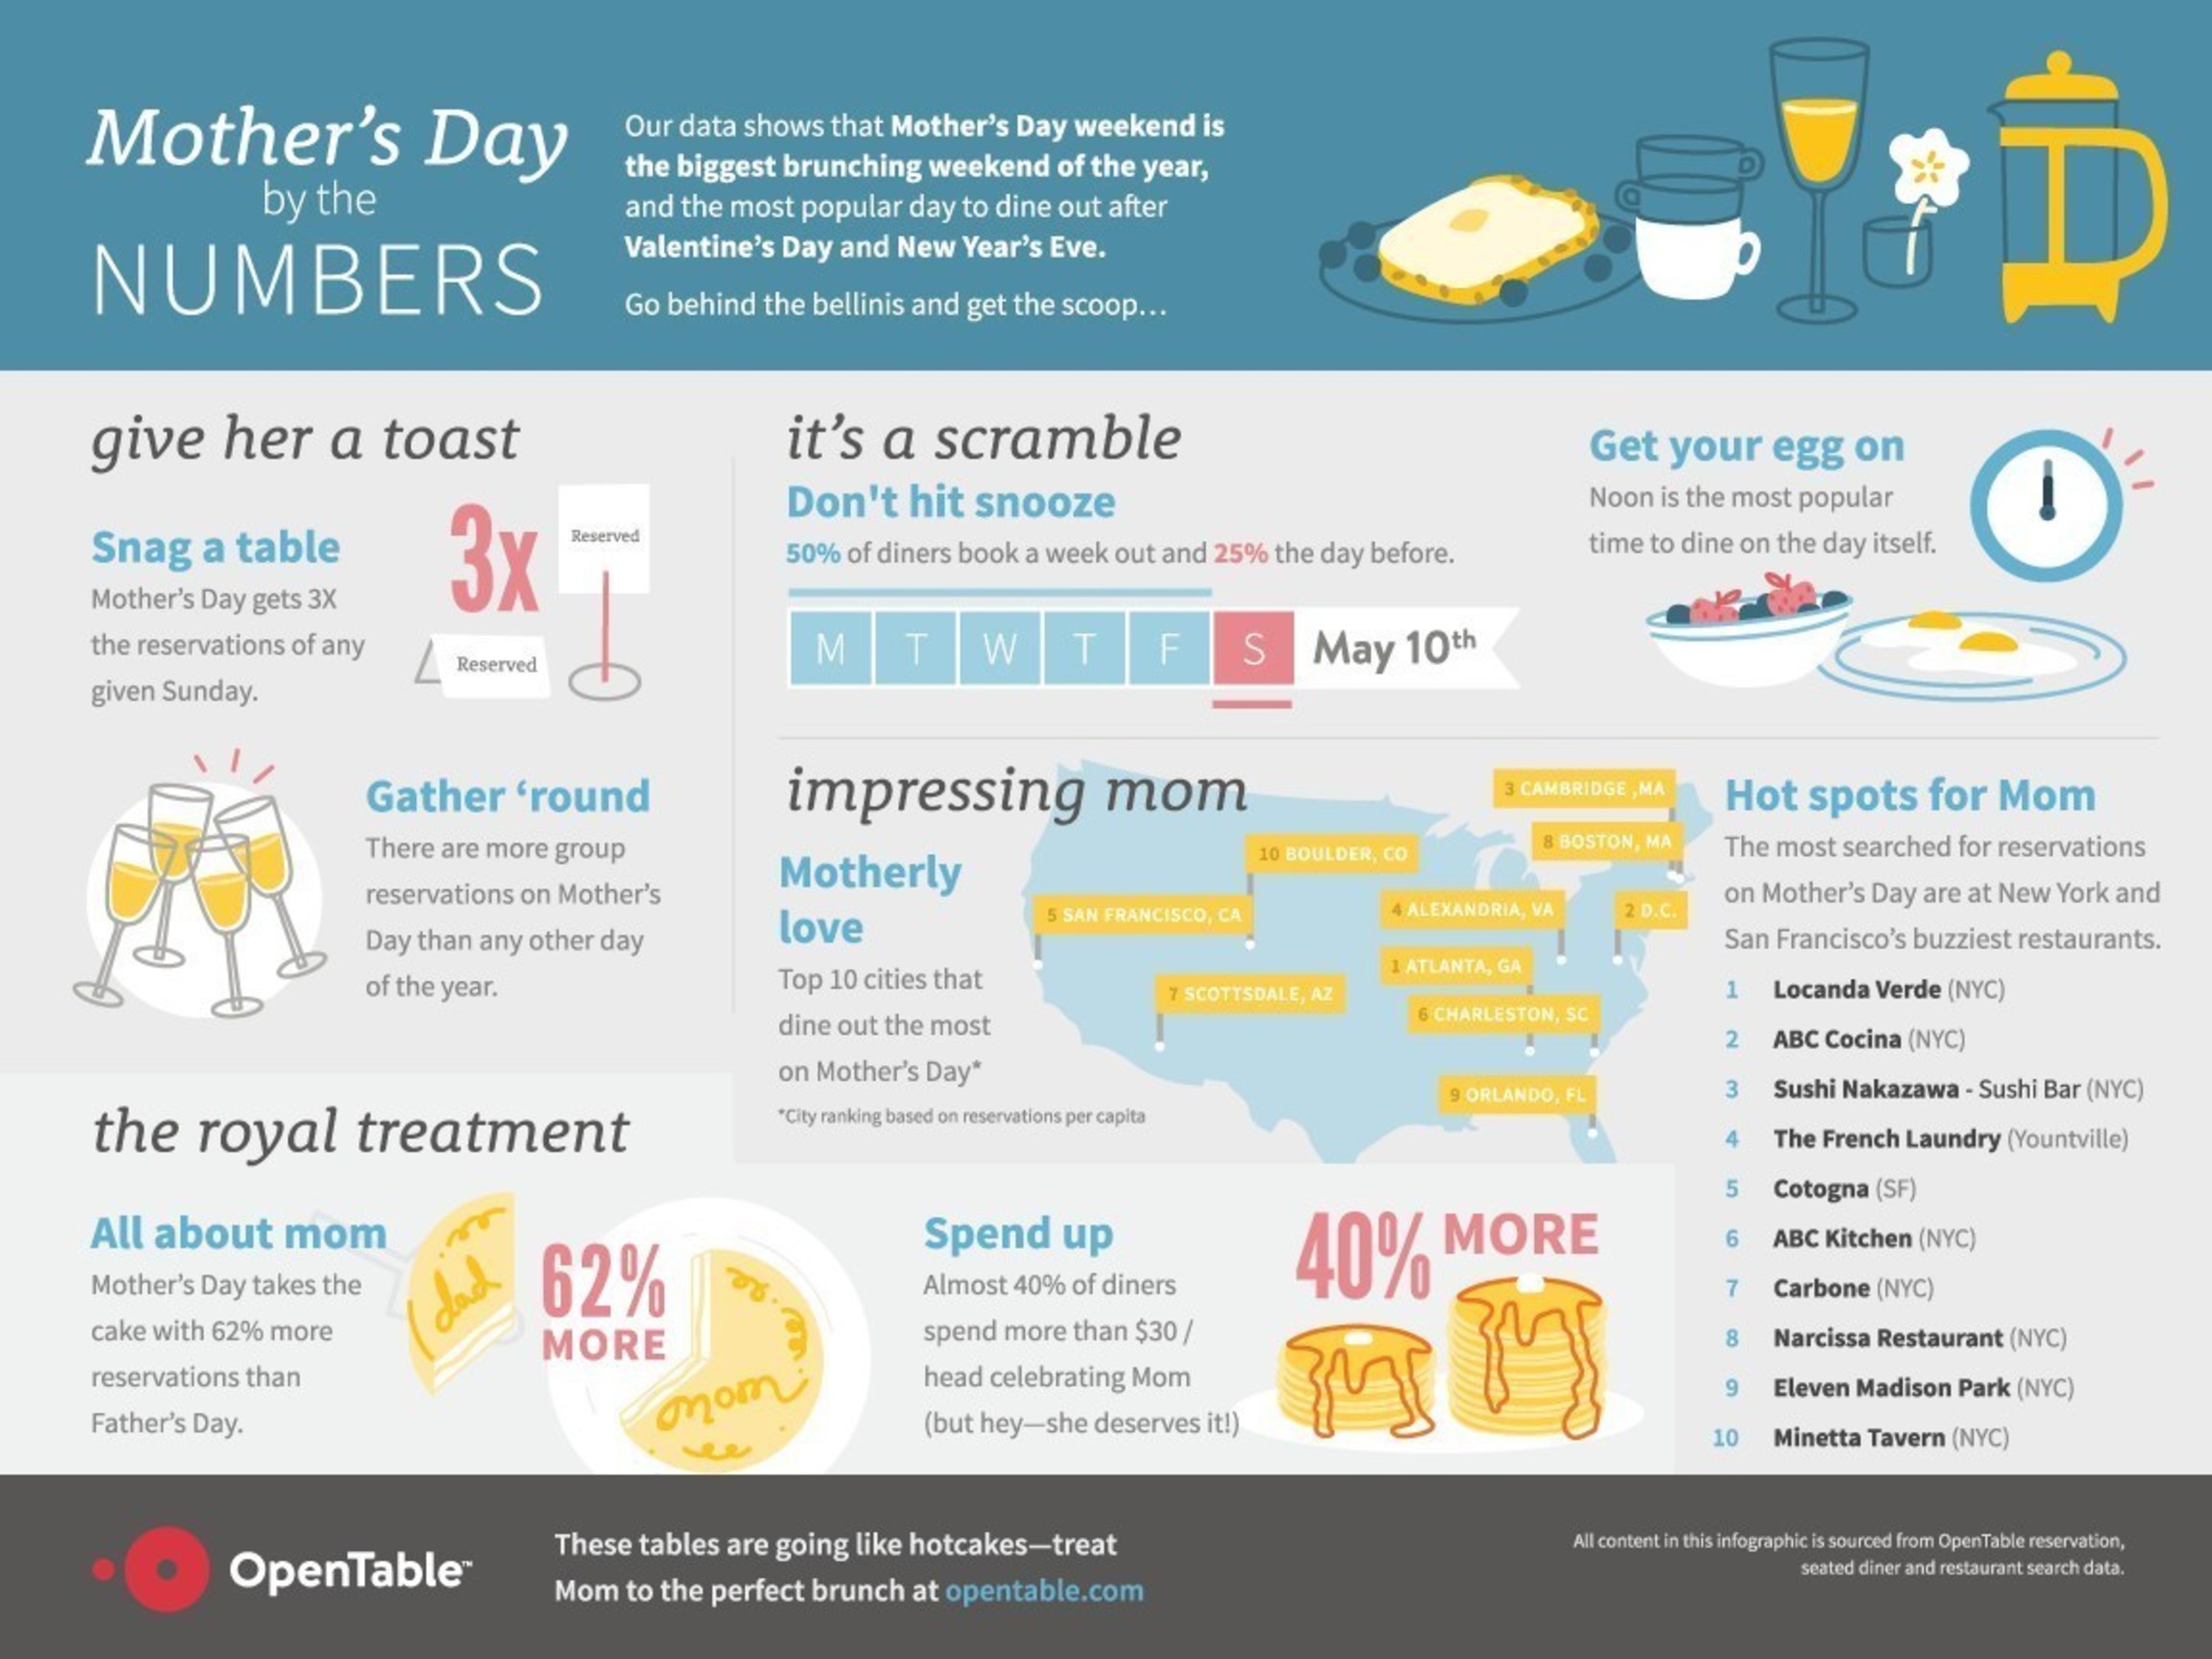 OpenTable Infographic Illustrates Mother's Day Dining by the Numbers